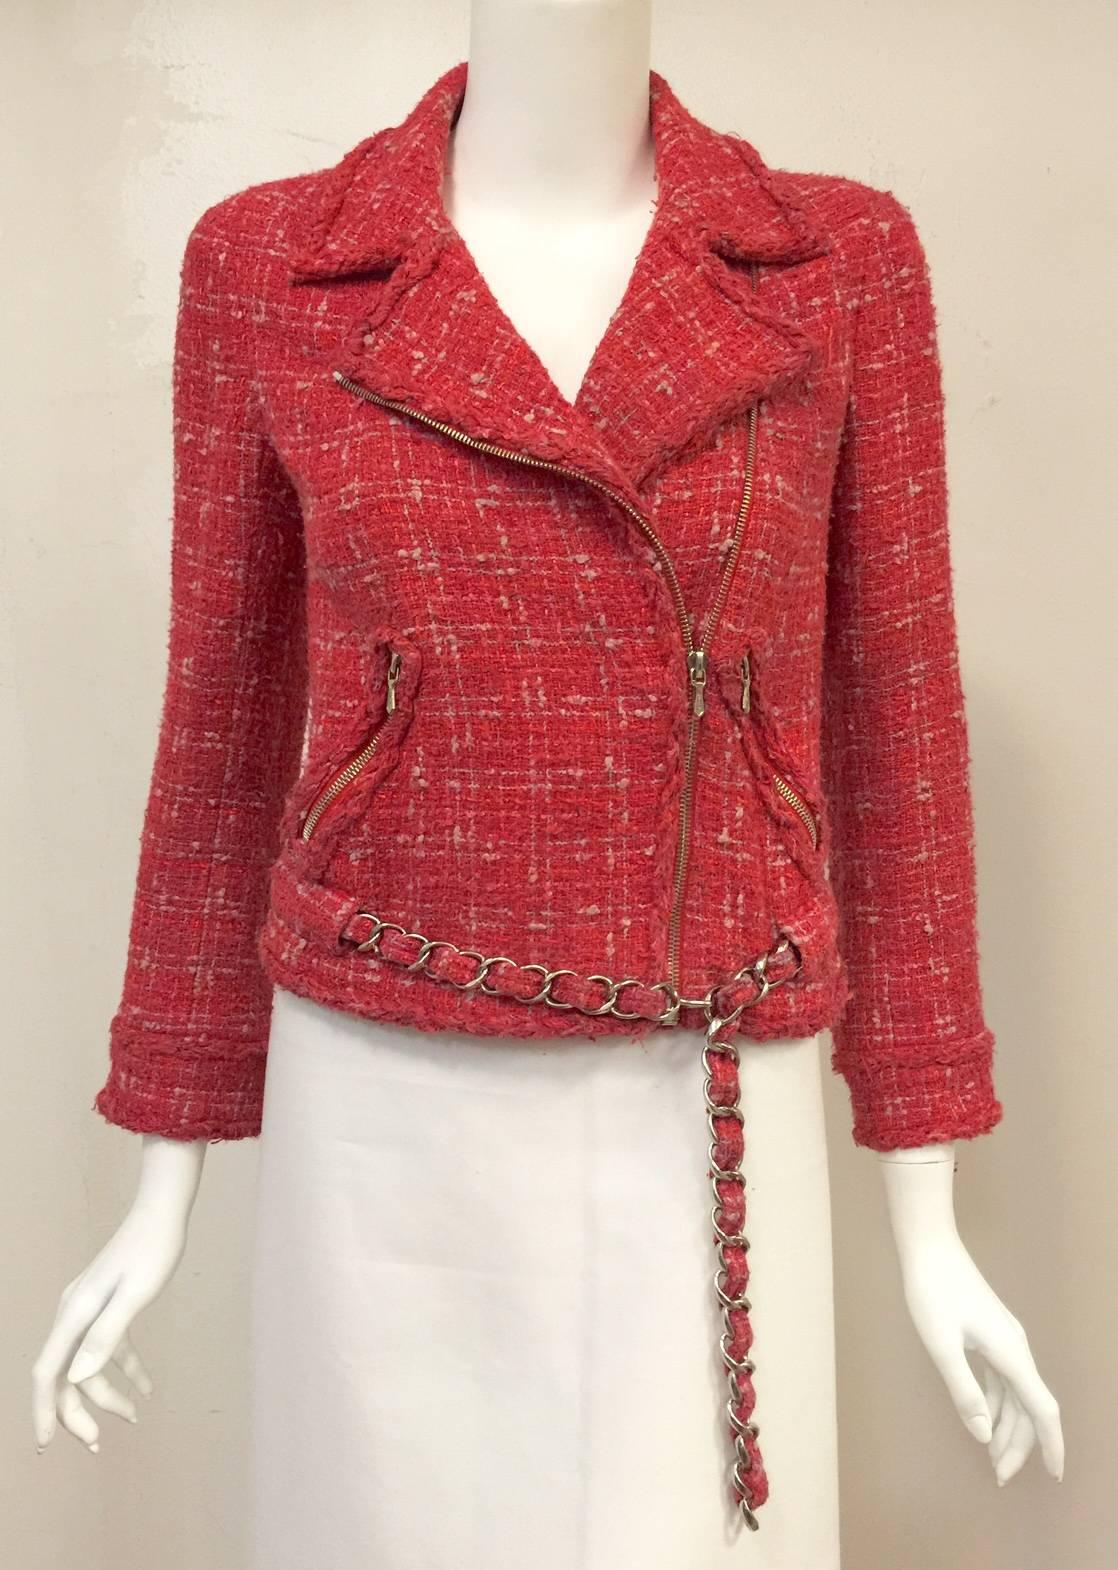 Chanel Tweed Biker Jacket is worthy of Coco and inspired by Marlon Brando's turn on the Silver Screen!  Like Coco, this jacket is contemporary, chic, and sophisticated.  Features the world renown tweed treatment in colors ranging from ripe